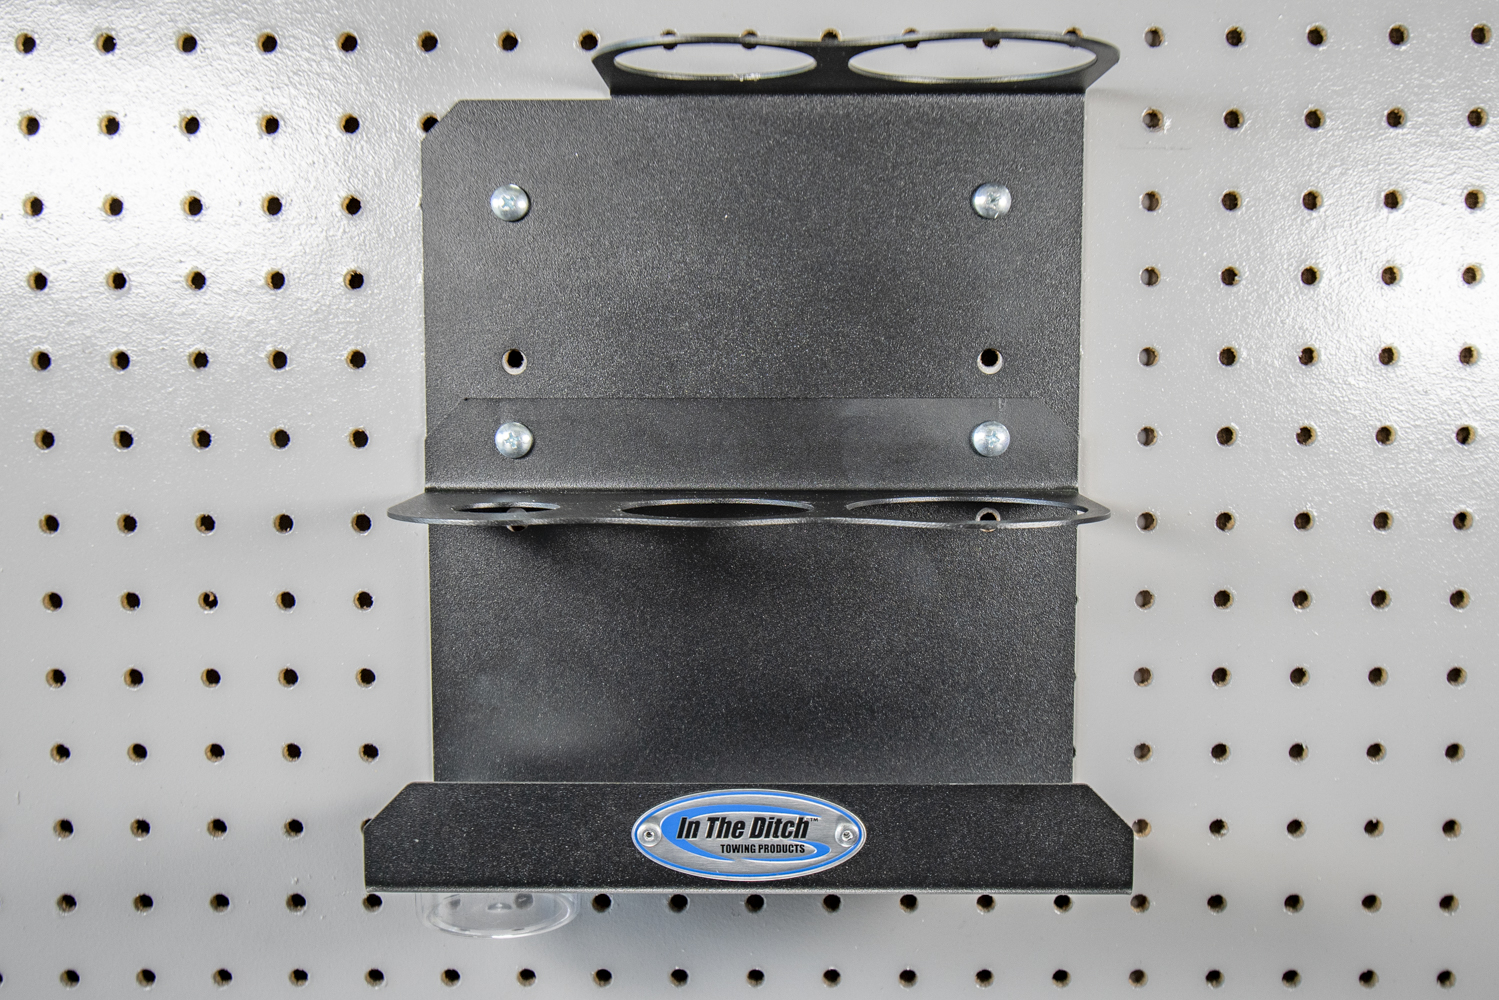 https://intheditch.com/wp-content/uploads/696-In-The-Ditch-Garage-Grease-Gun-Holder-ITD1889.jpg